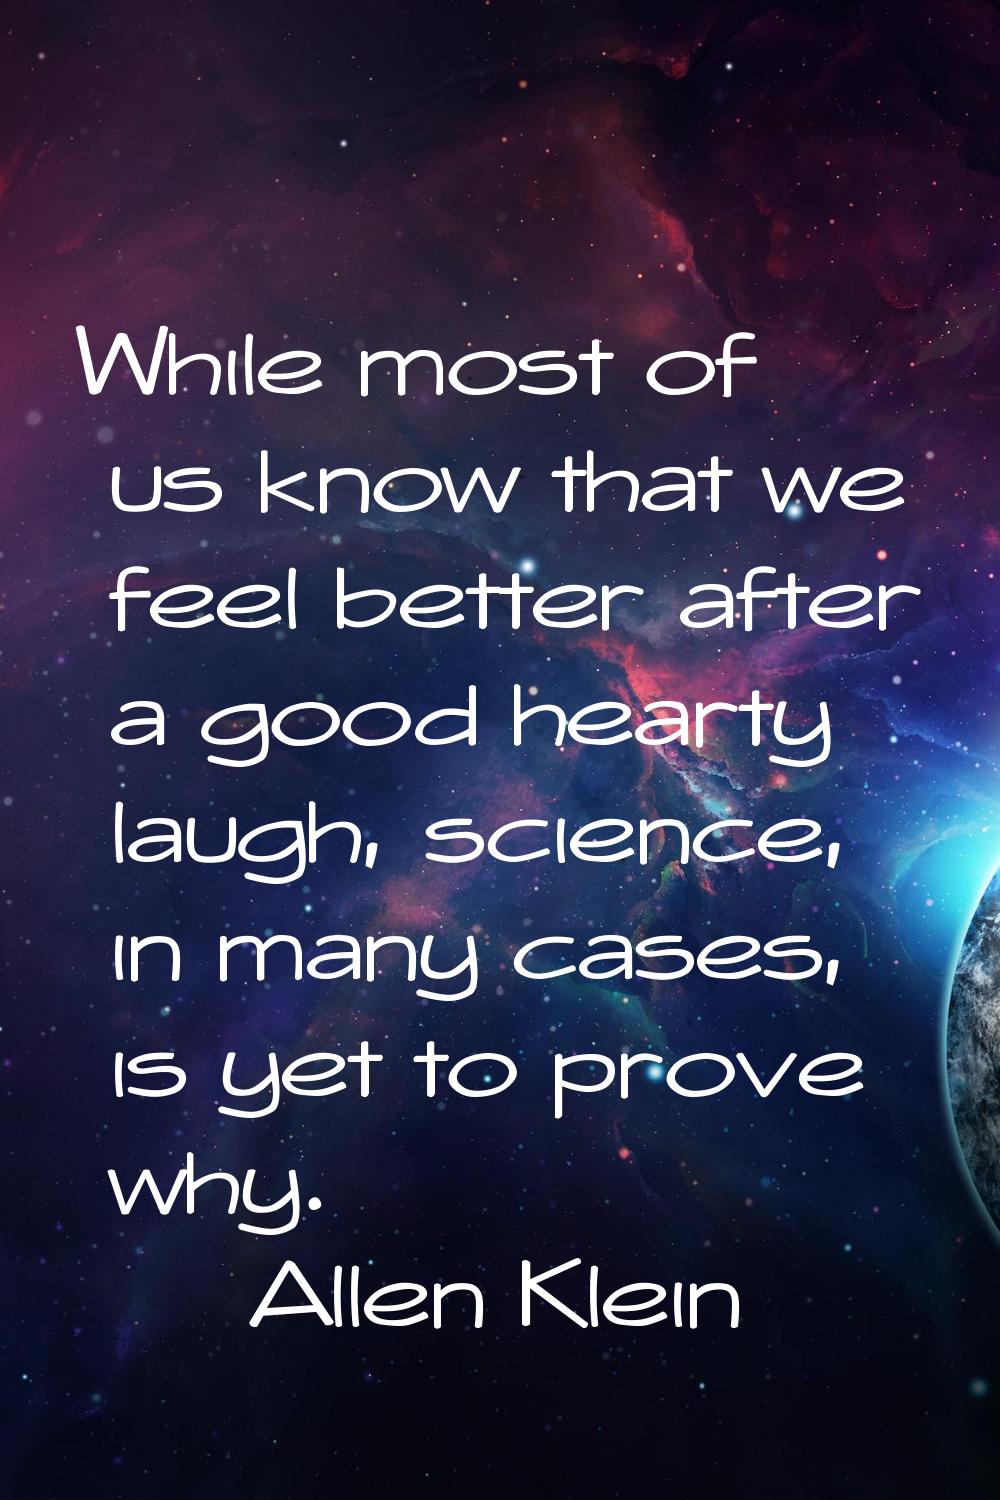 While most of us know that we feel better after a good hearty laugh, science, in many cases, is yet